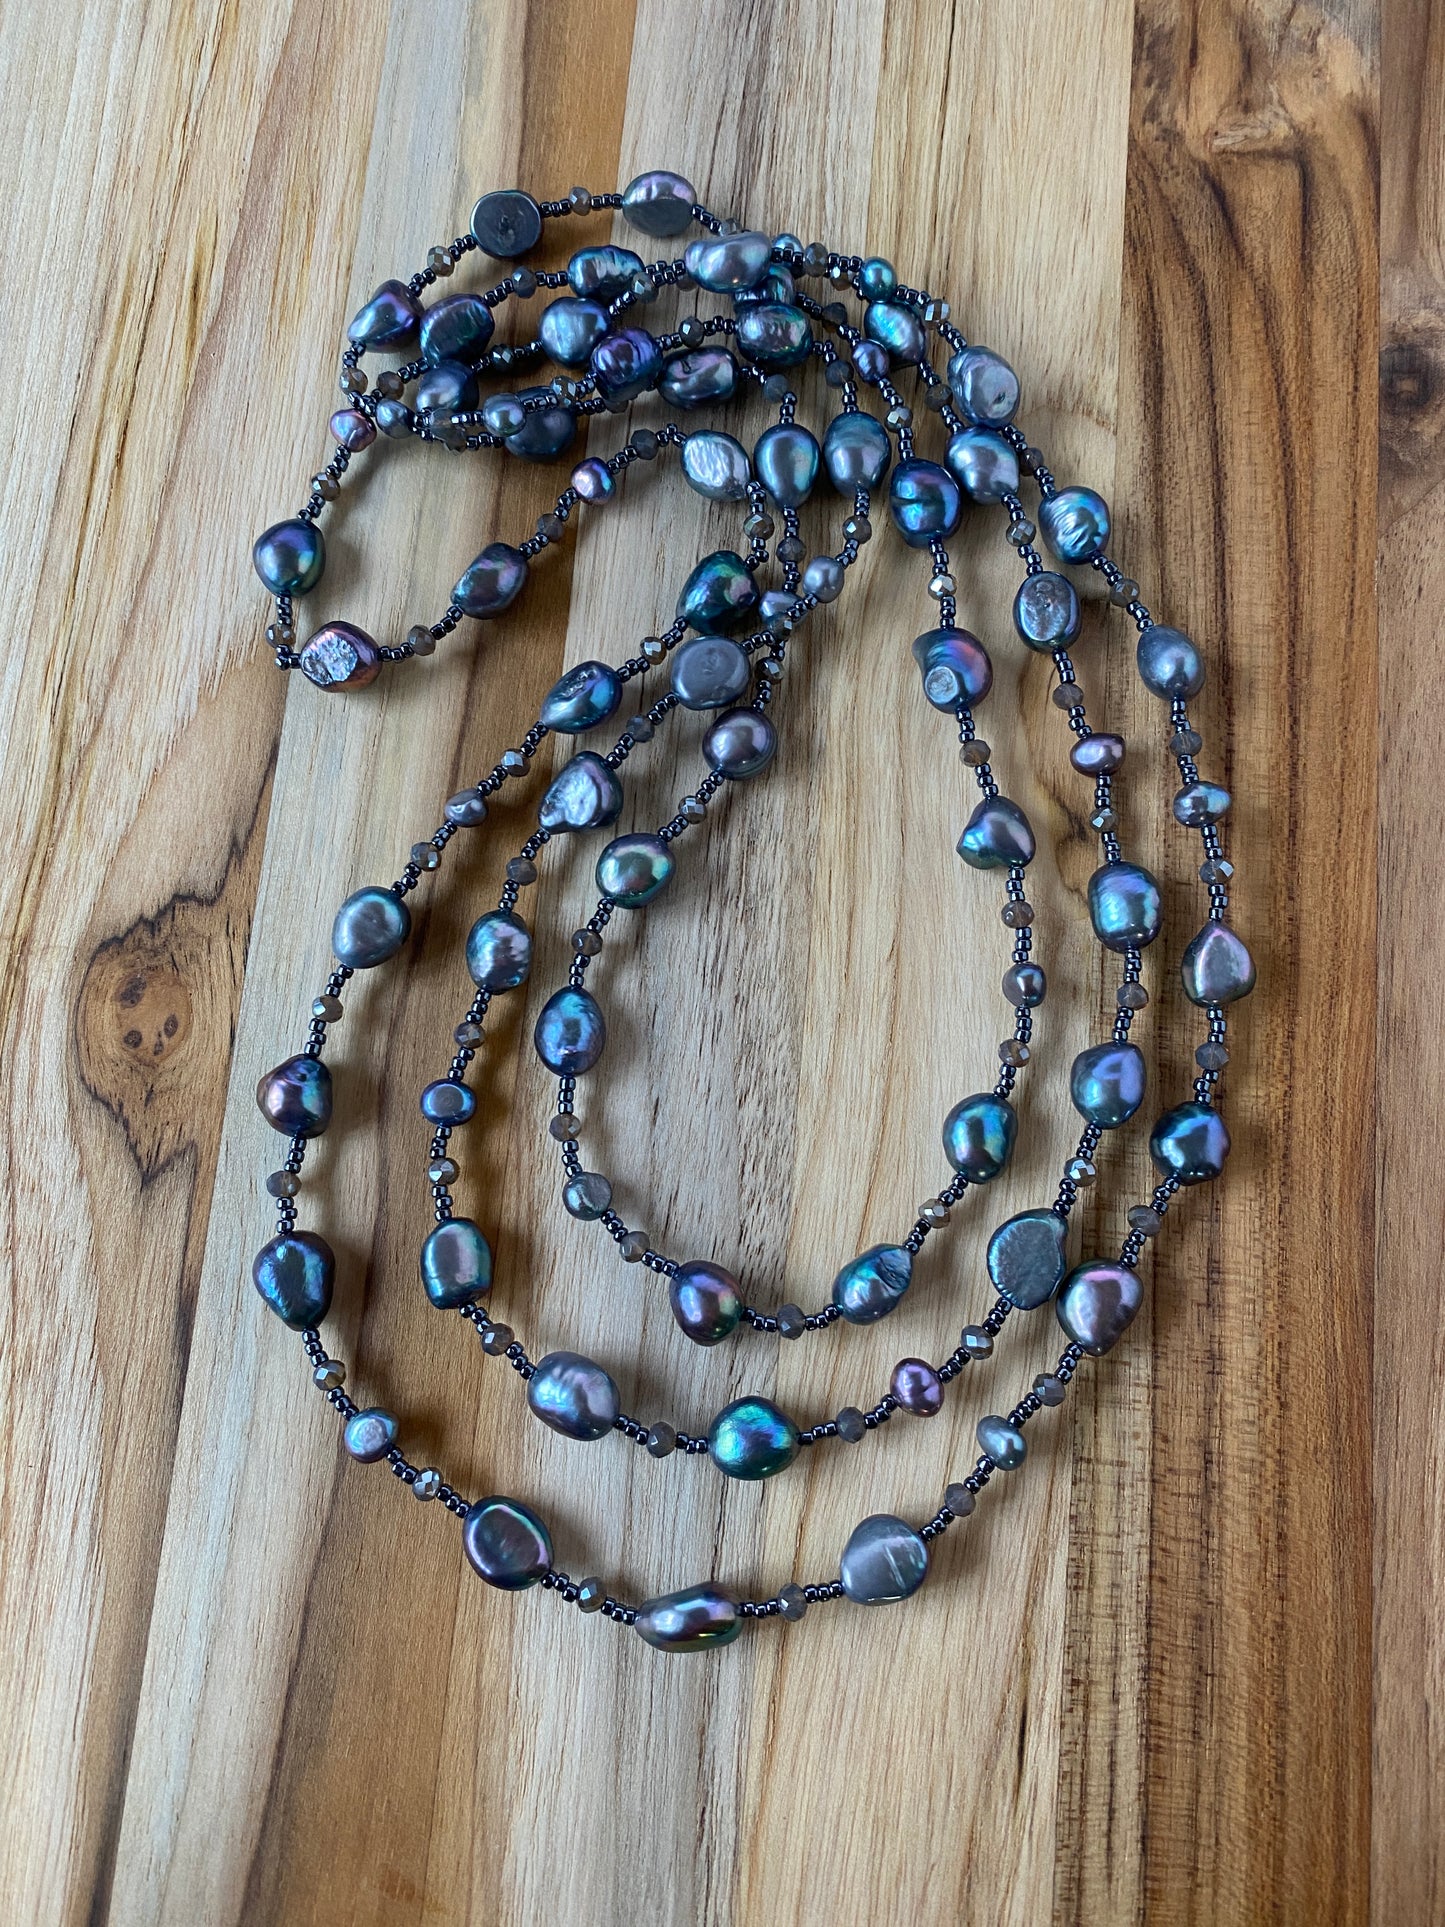 60" Extra Long Beaded Grey Peacock Freshwater Pearl Necklace with Crystal Beads